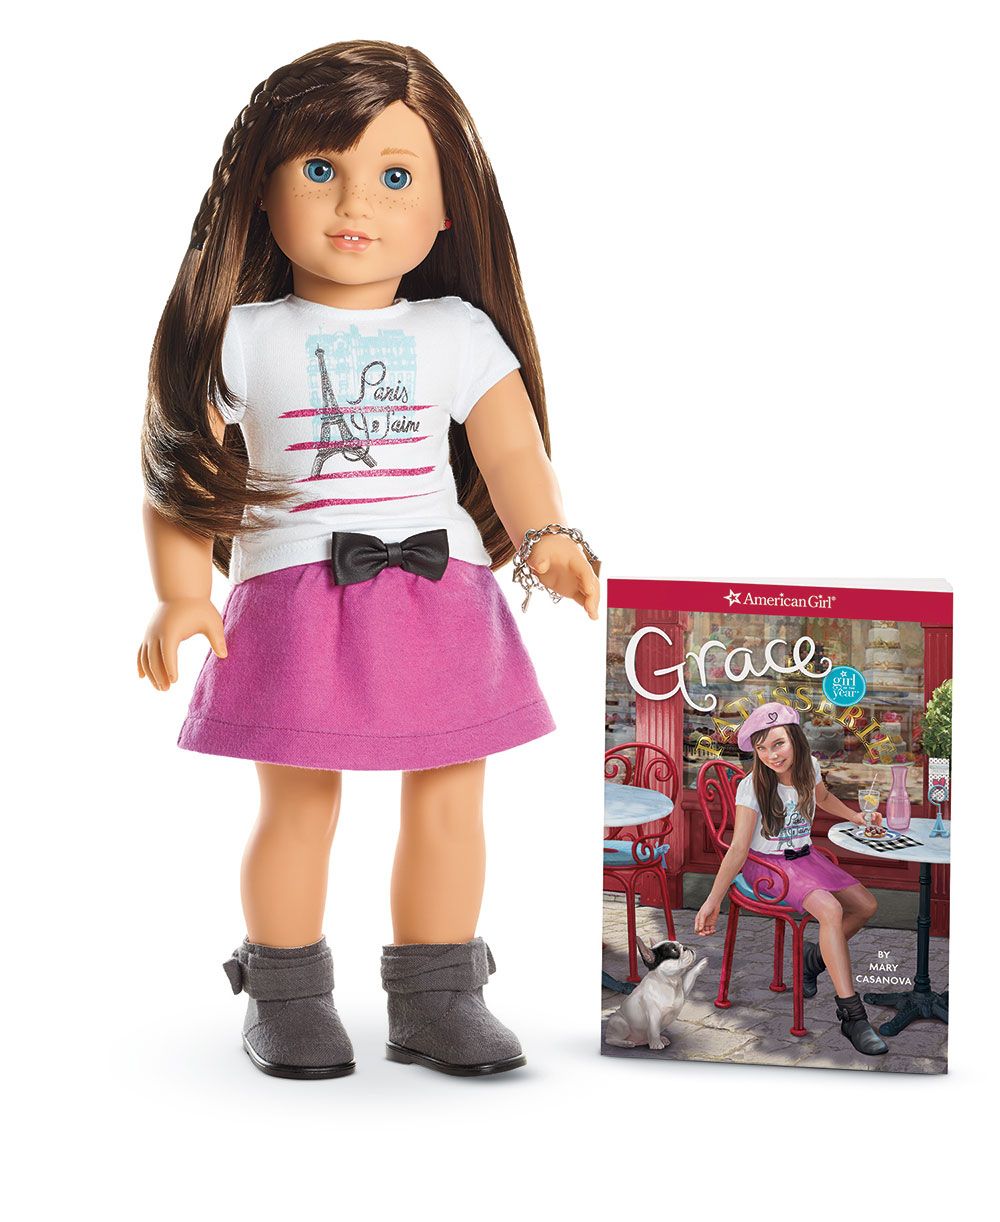 the newest american girl doll